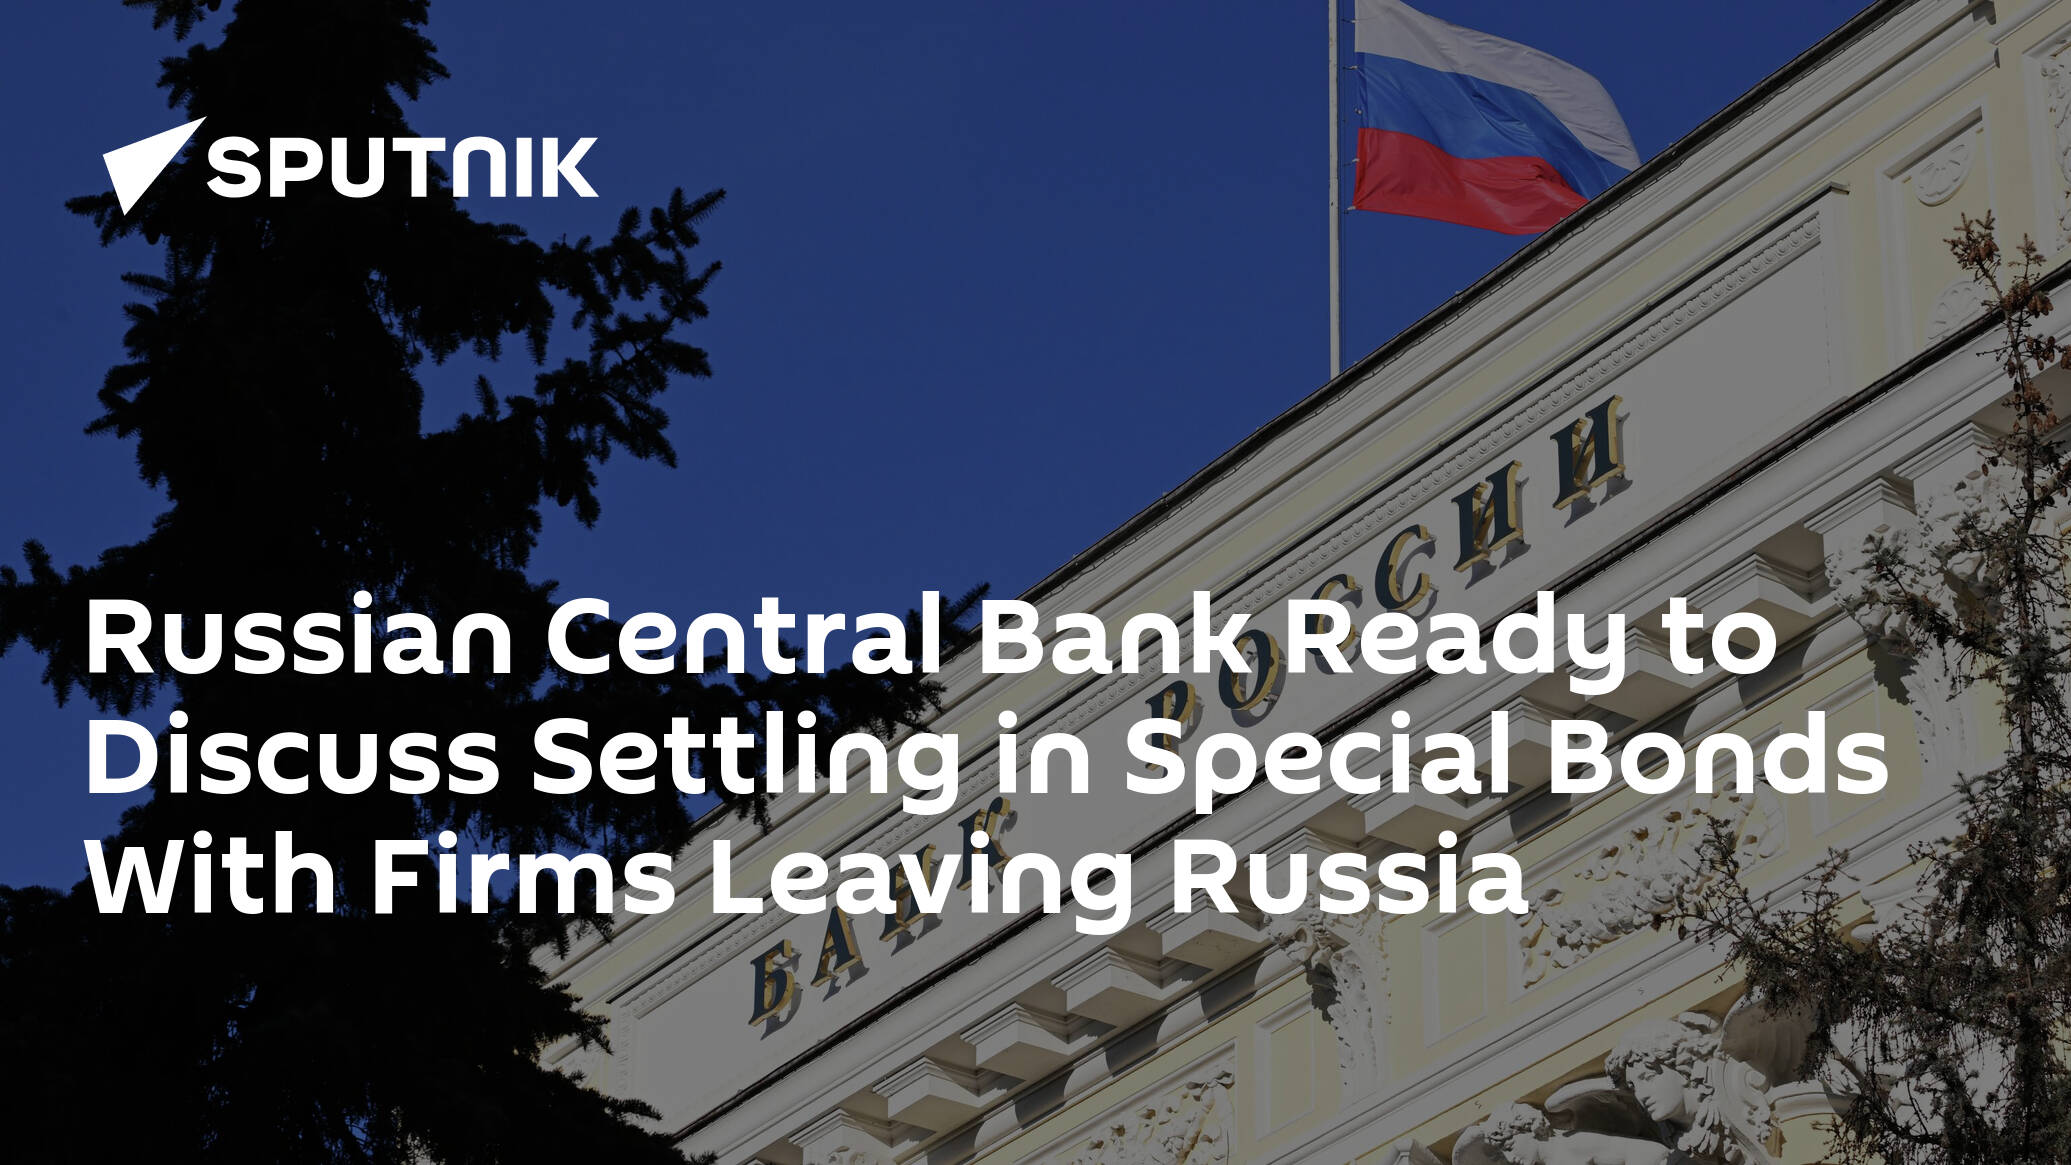 Russian Central Bank Ready to Discuss Settling in Special Bonds With Firms Leaving Russia